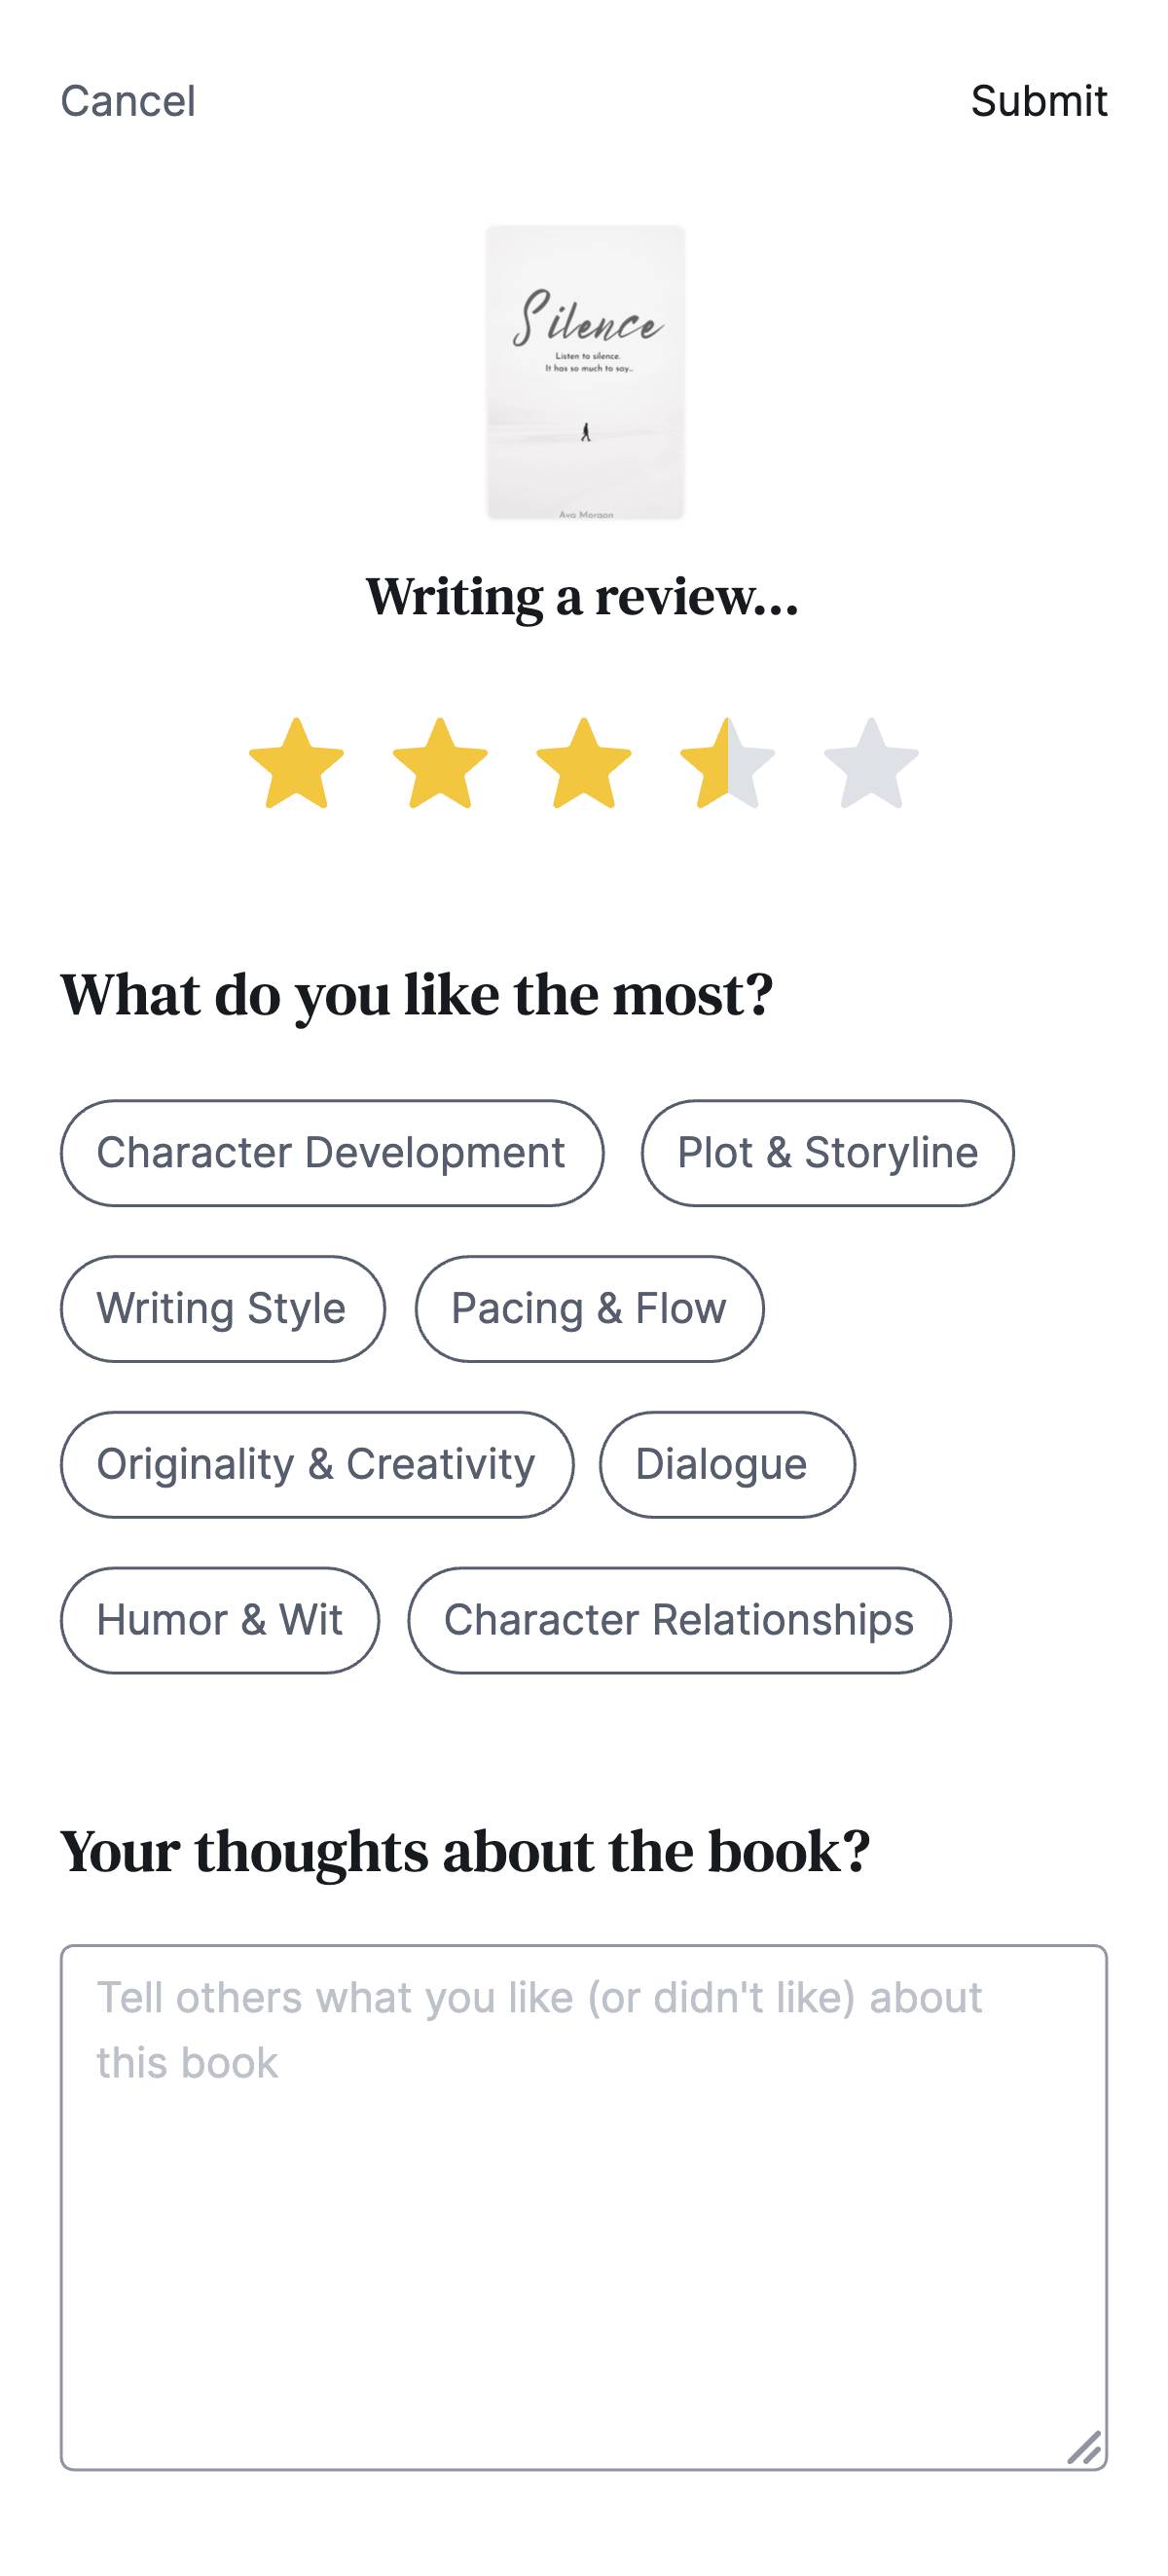 Review a book